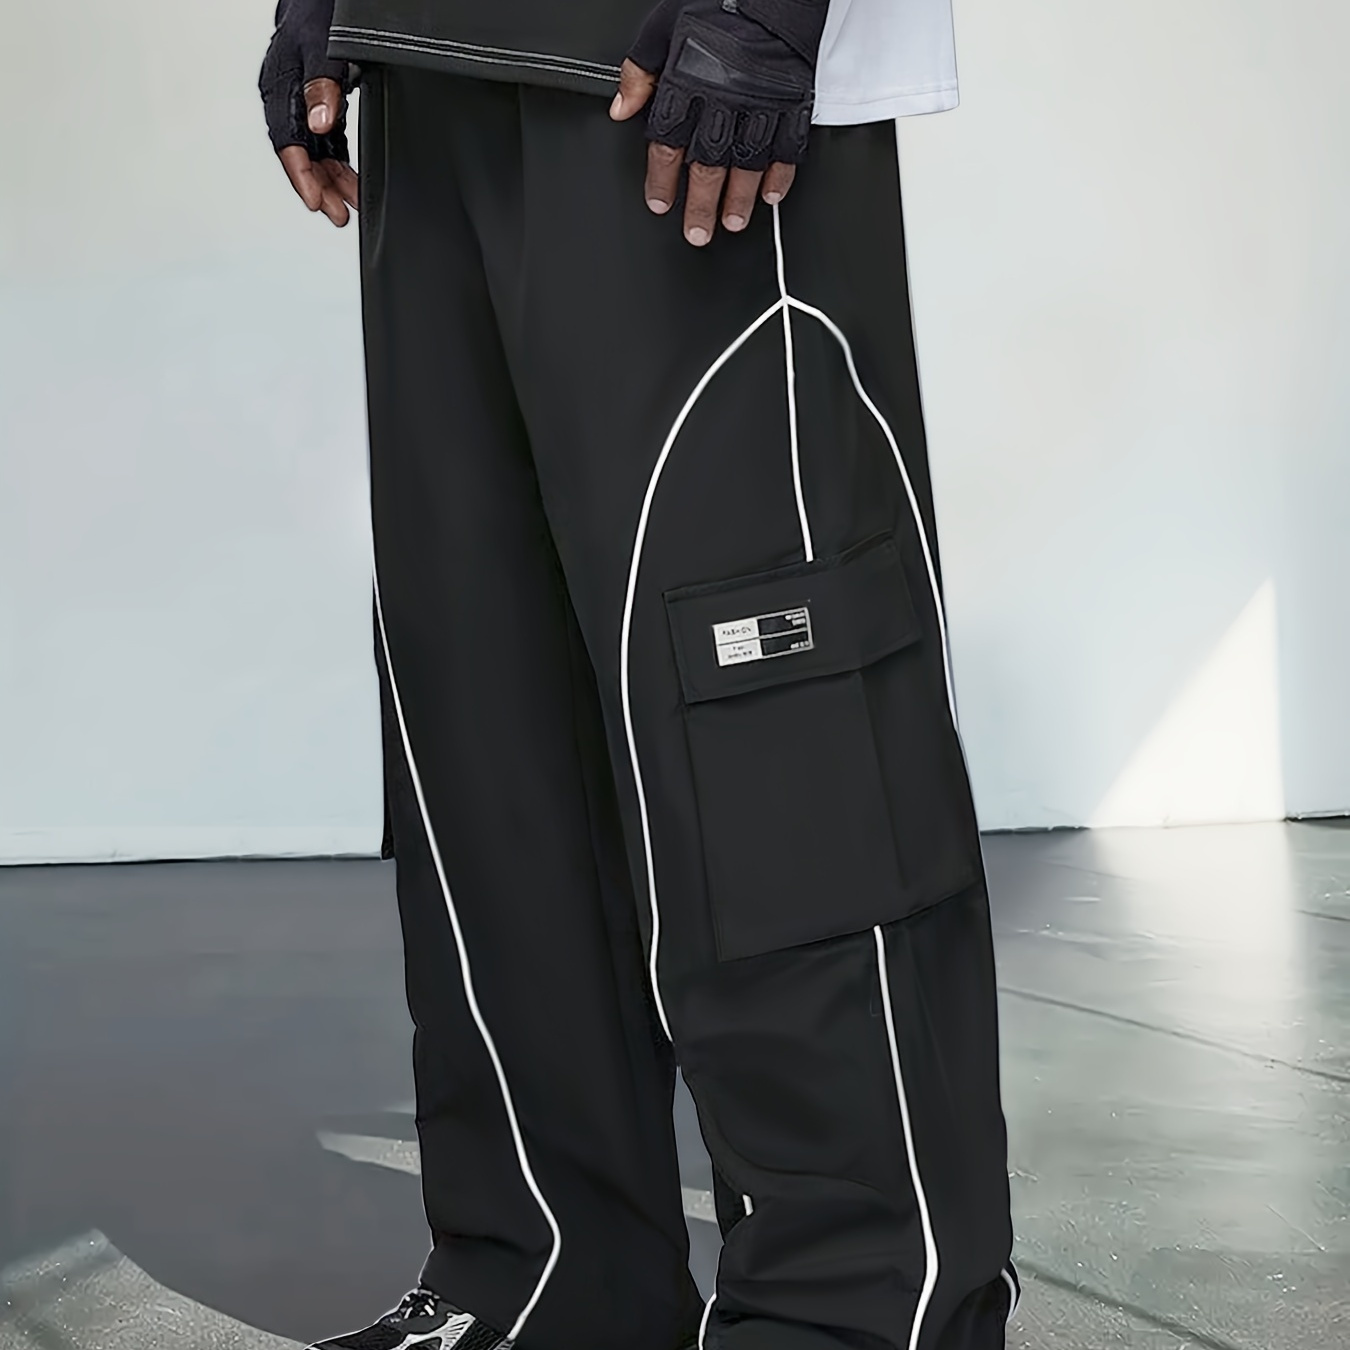 

Men's Black Pants With Contrast White Trim, Loose Fit Trousers With Drawstring And Pockets, Sporty Casual Spring/autumn Wear